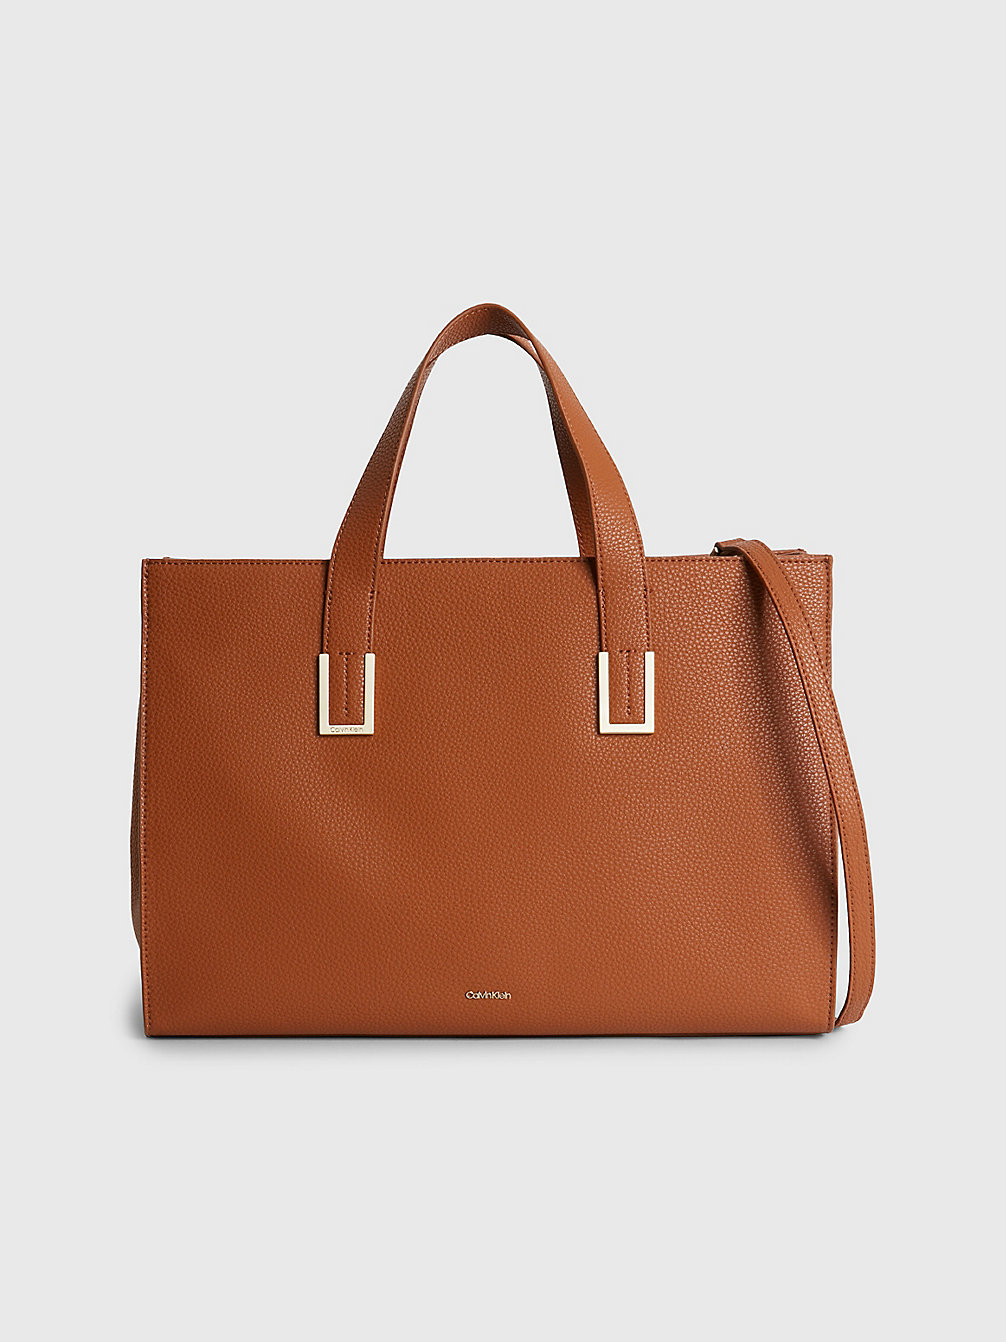 COGNAC Large Recycled Tote Bag undefined women Calvin Klein